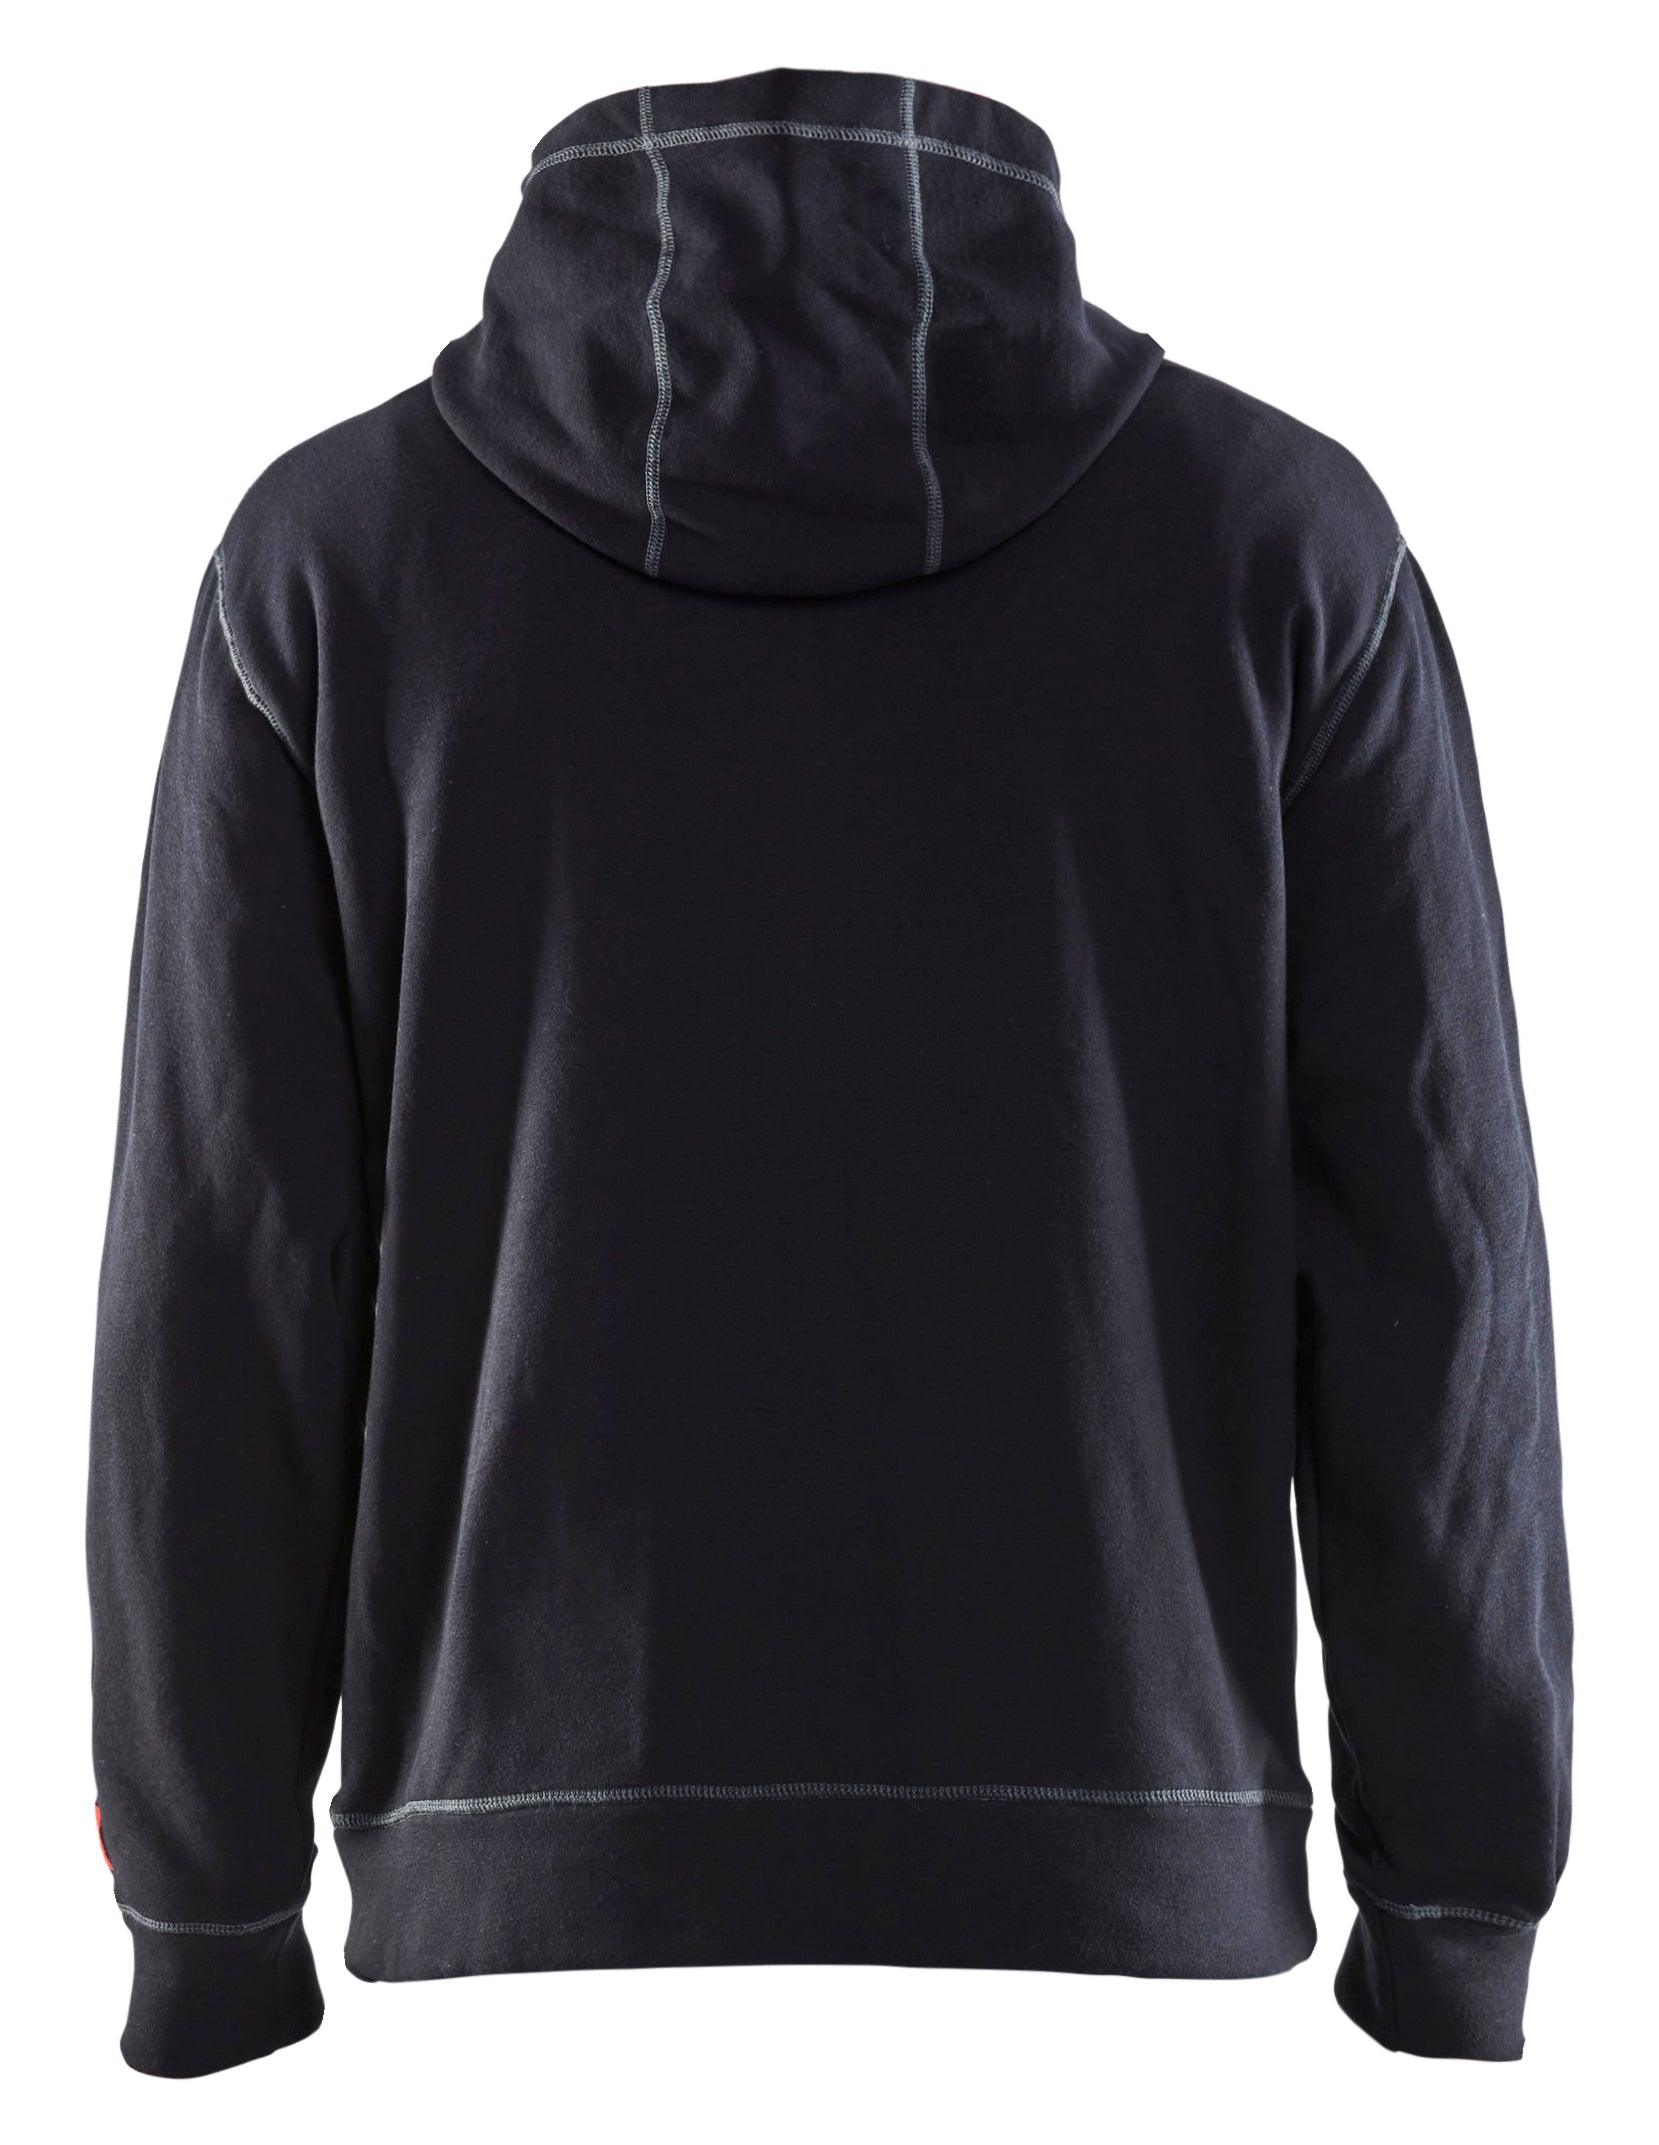 Blaklader 3492 Flame Resistant Pullover Hoodie - Navy Blue - Trusted Gear Company LLC